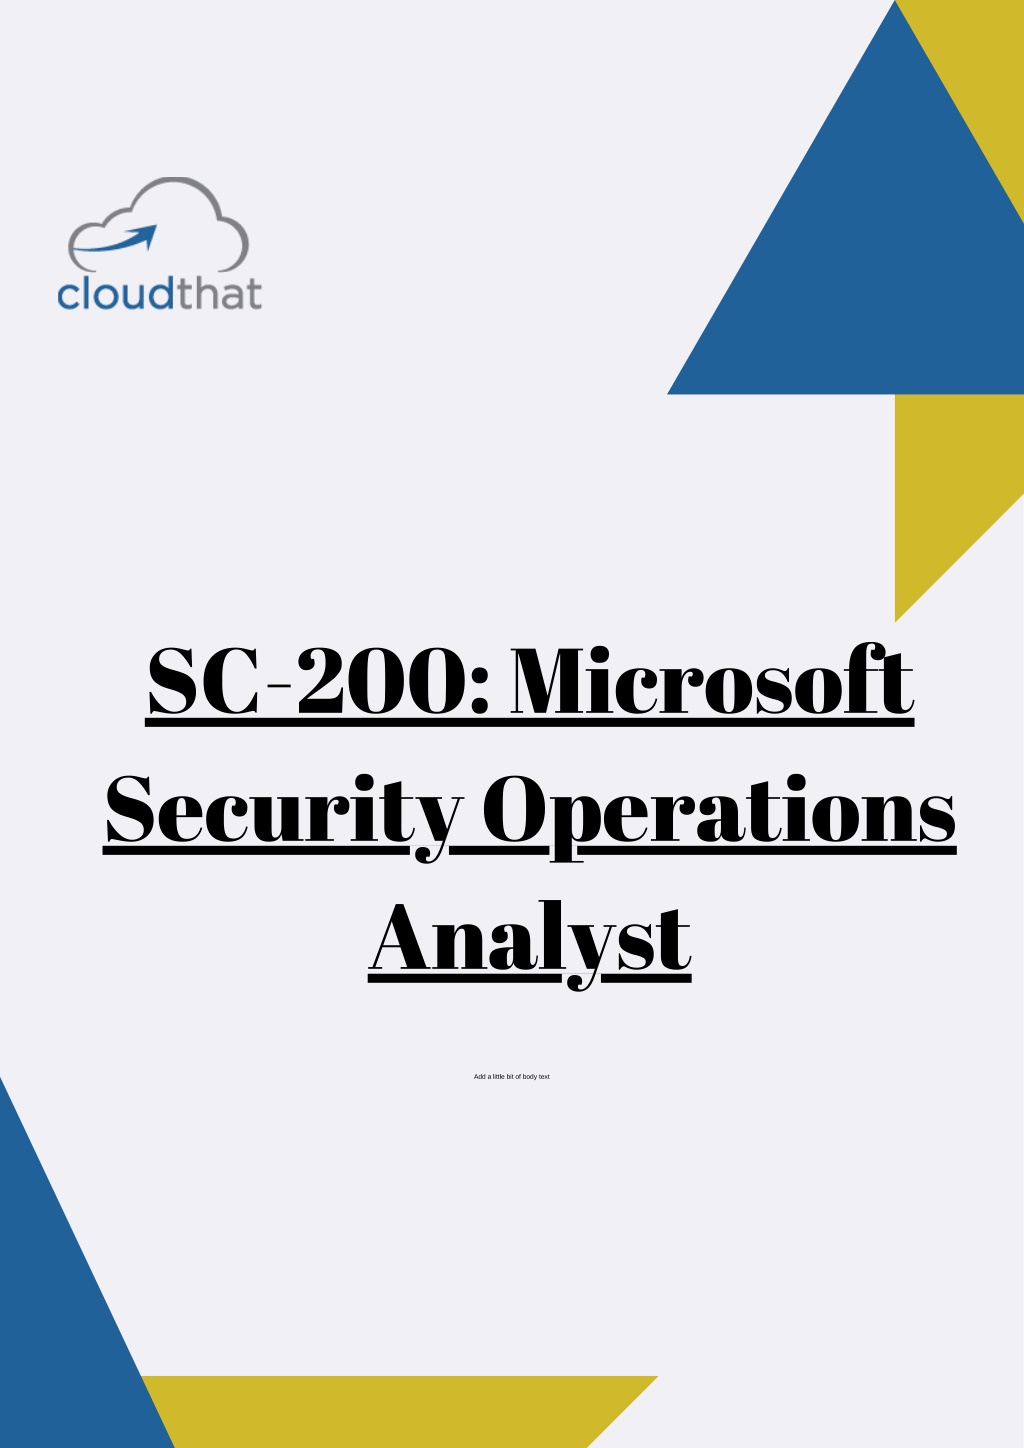 How to pass the Microsoft Security Operations Analyst SC-200 Exam